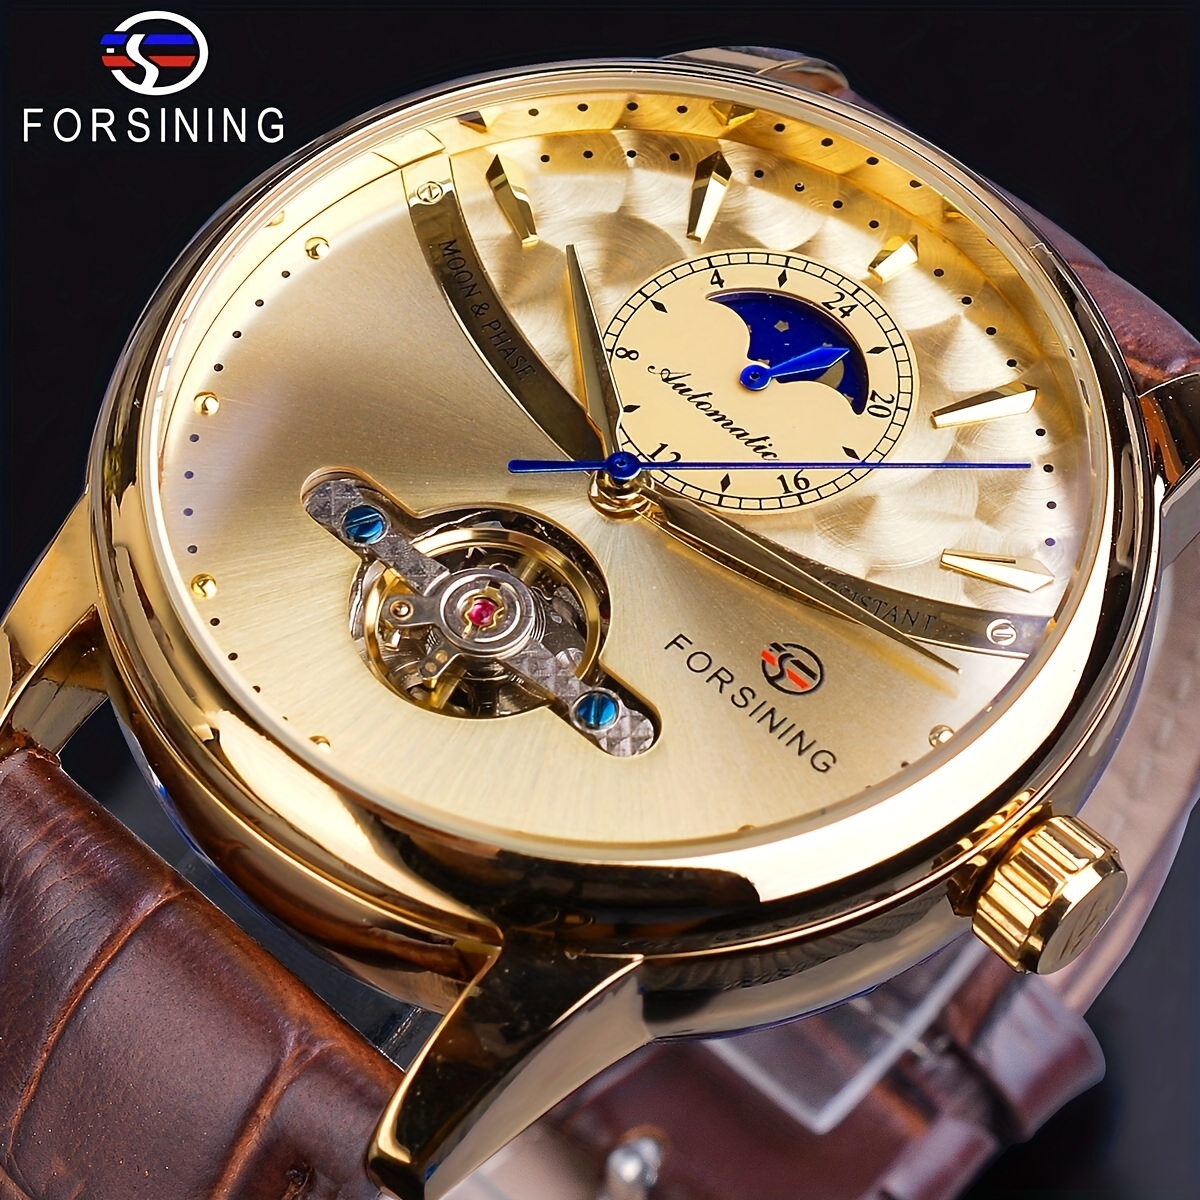 

Forsining Moon Phase Men's Mechanical Watch, Comfortable Casual Tourbillon Wristwatch, Ideal Choice For Gifts